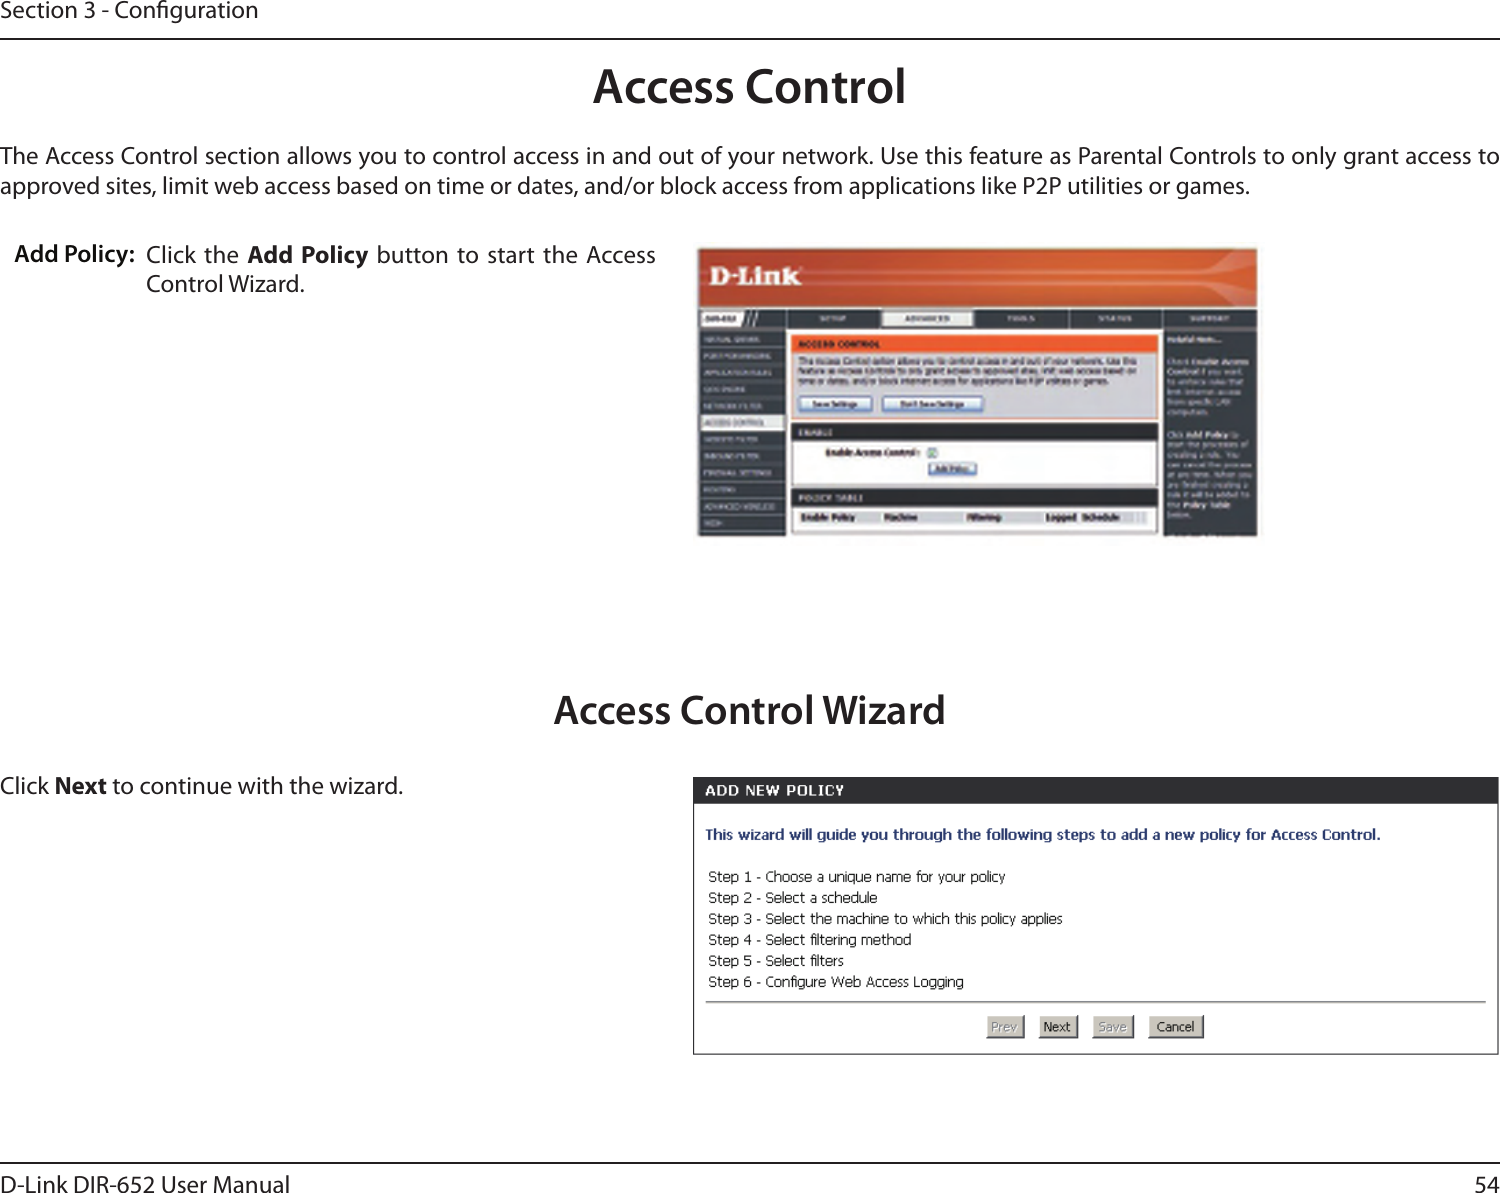 54D-Link DIR-652 User ManualSection 3 - CongurationAccess ControlClick the  Add Policy  button to start the Access Control Wizard. Add Policy:The Access Control section allows you to control access in and out of your network. Use this feature as Parental Controls to only grant access to approved sites, limit web access based on time or dates, and/or block access from applications like P2P utilities or games.Click Next to continue with the wizard.Access Control Wizard